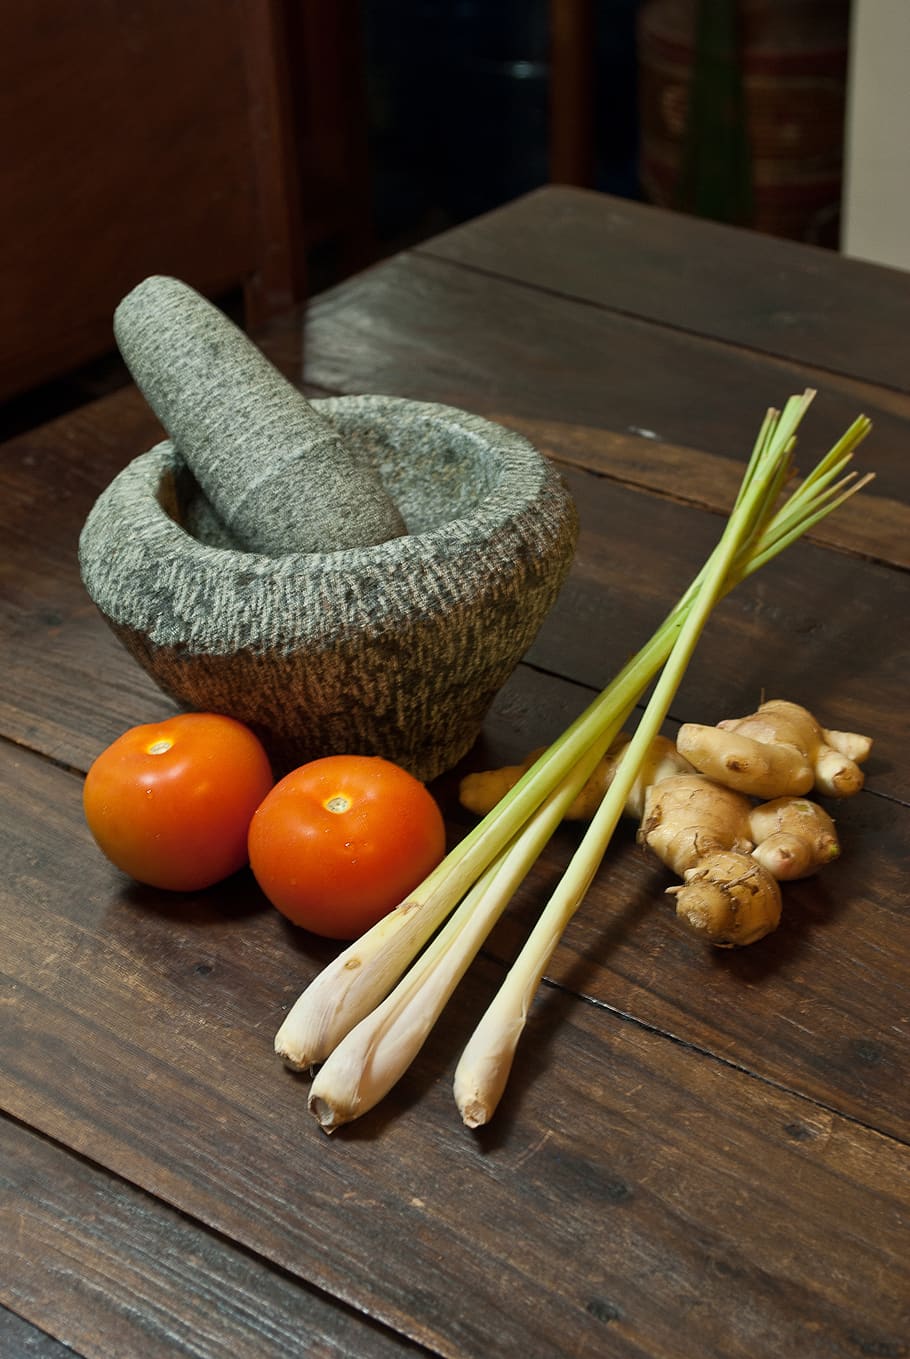 asian, asia, malaysia, tomatoes, lemongrass, cooking, wooden table, ginger, food, food and drink